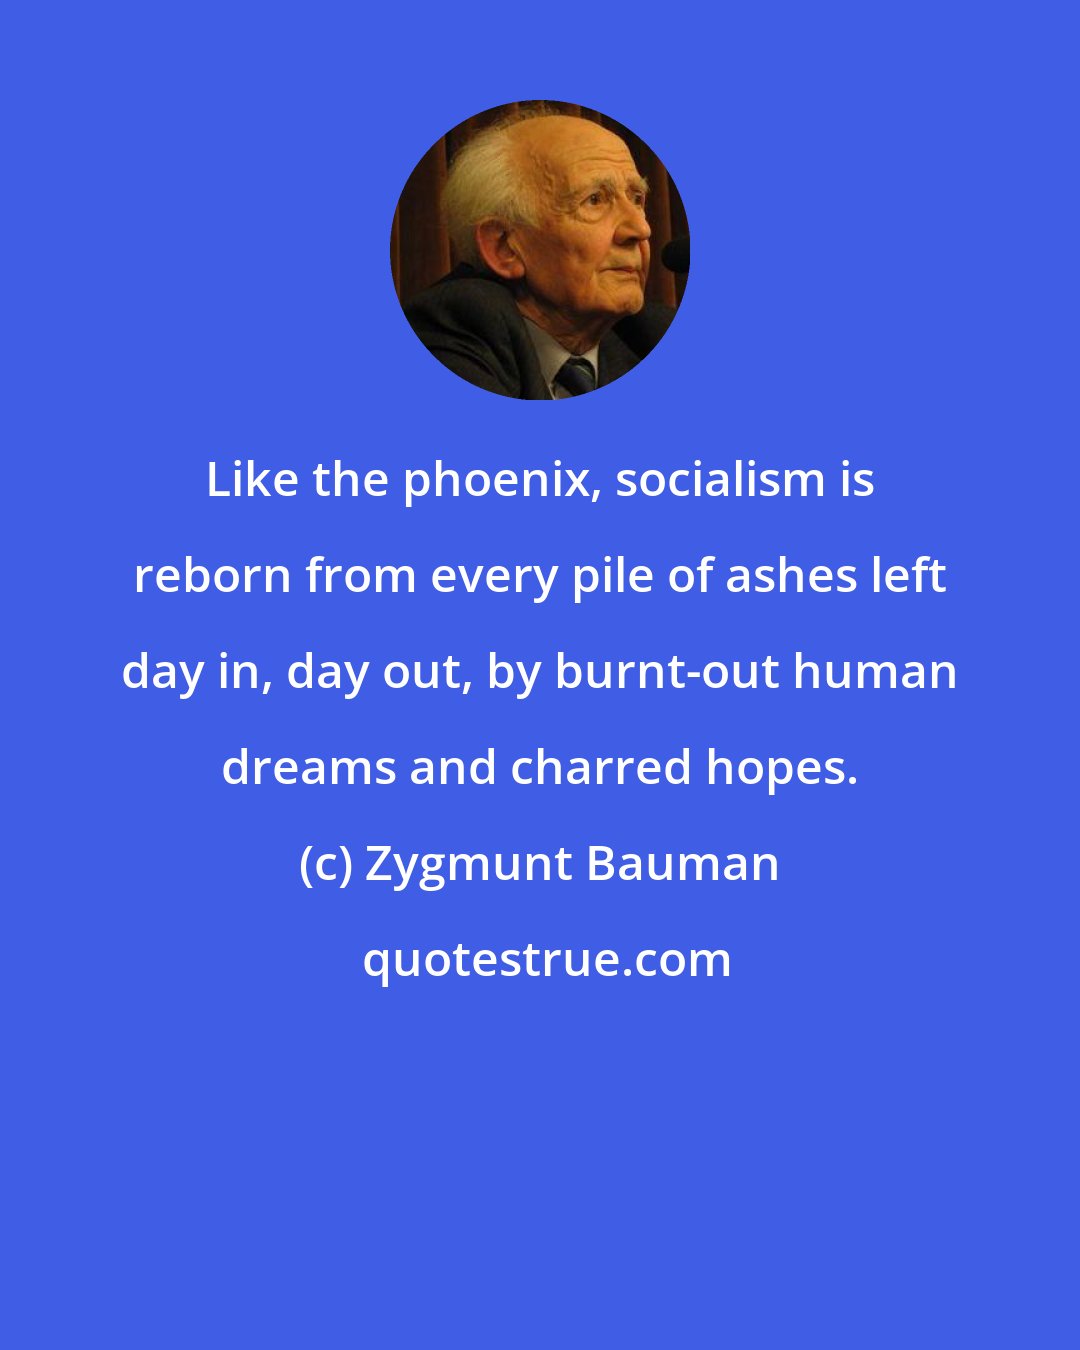 Zygmunt Bauman: Like the phoenix, socialism is reborn from every pile of ashes left day in, day out, by burnt-out human dreams and charred hopes.